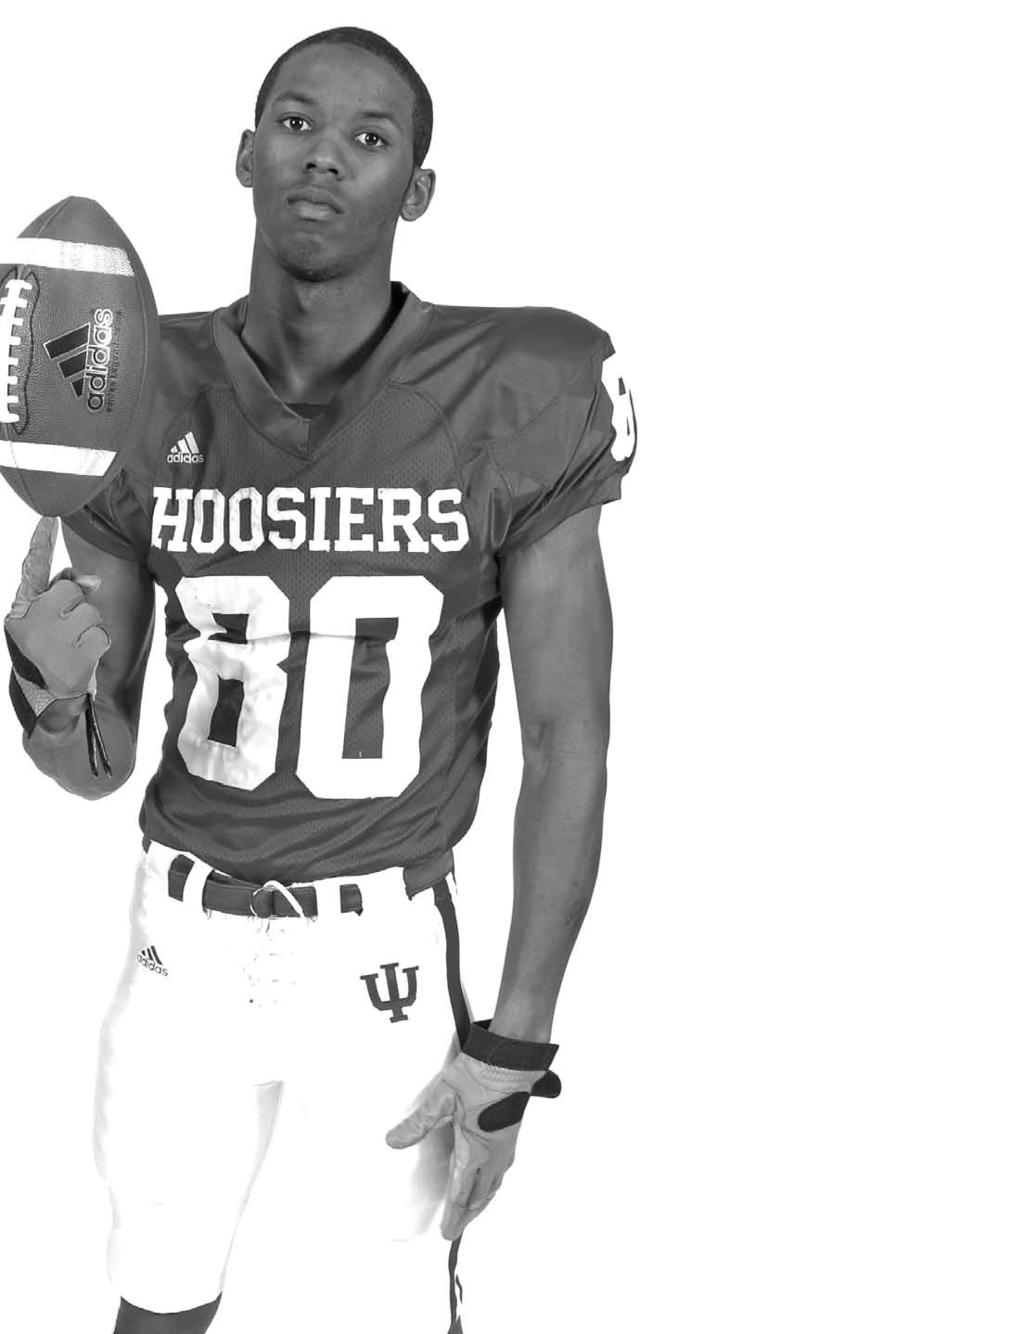 hoosiers INDIANA UNIVERSITY 2008 80 Chris Banks Wide Receiver 6-2 180 Junior-R Alliance, Ohio Alliance 2007 (Sophomore): Appeared in three games as a reserve wide receiver.